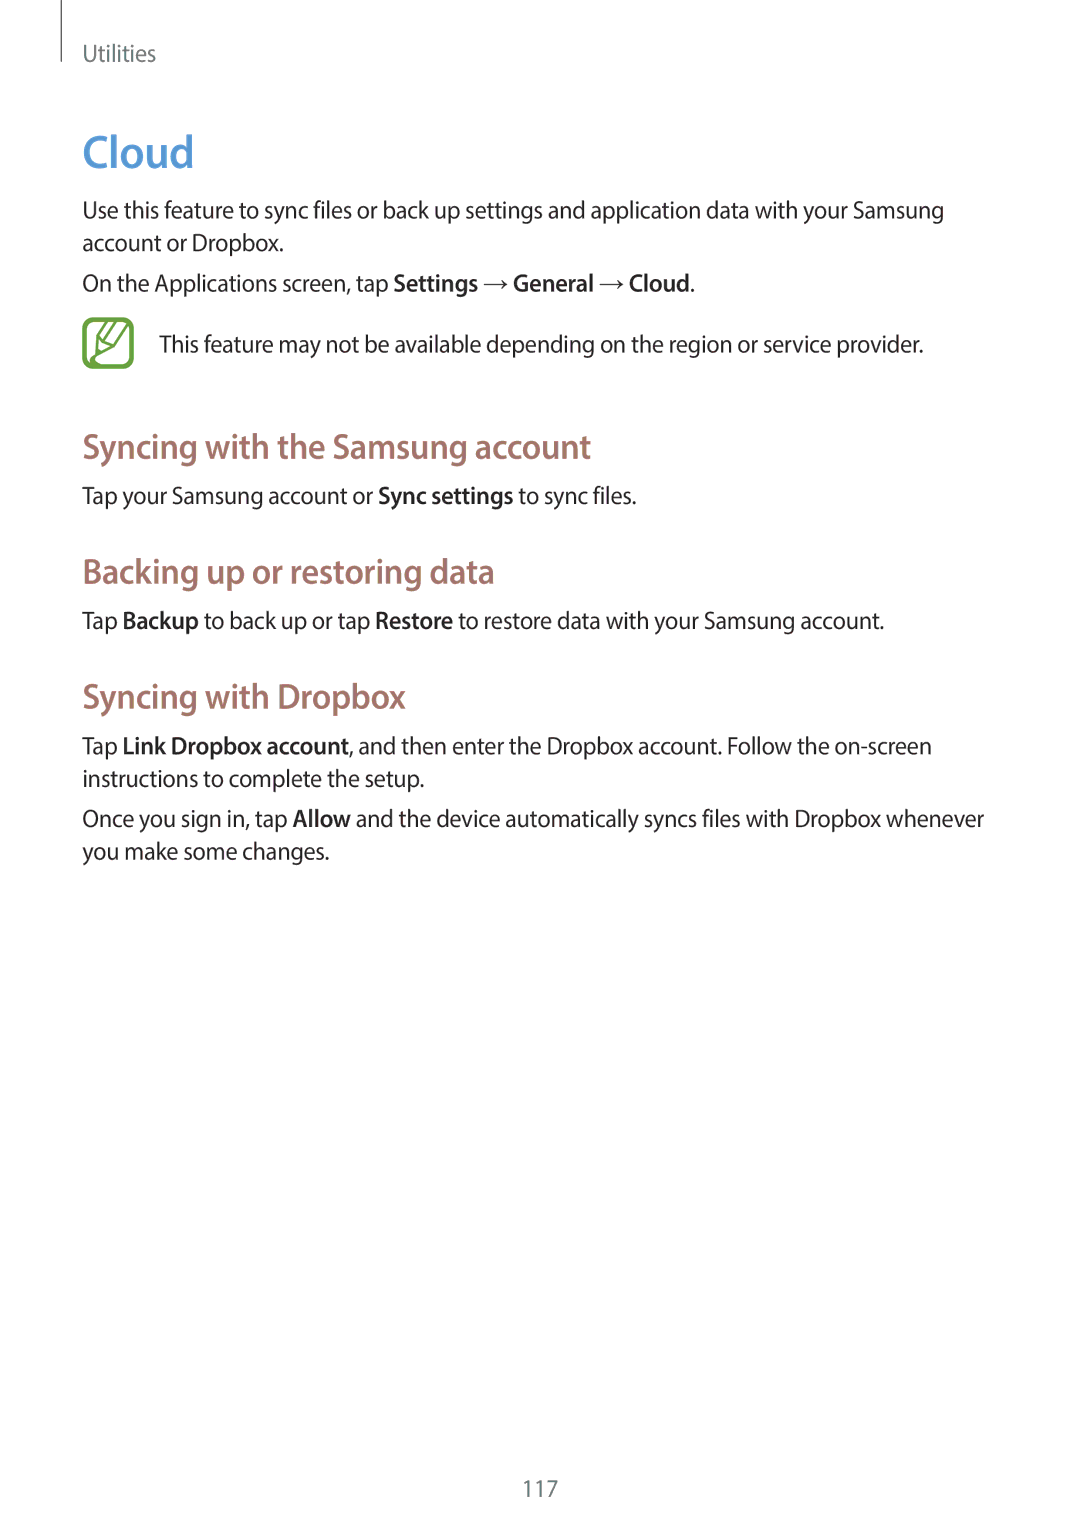 Samsung SM-N7500ZGAPAK manual Cloud, Syncing with the Samsung account, Backing up or restoring data, Syncing with Dropbox 